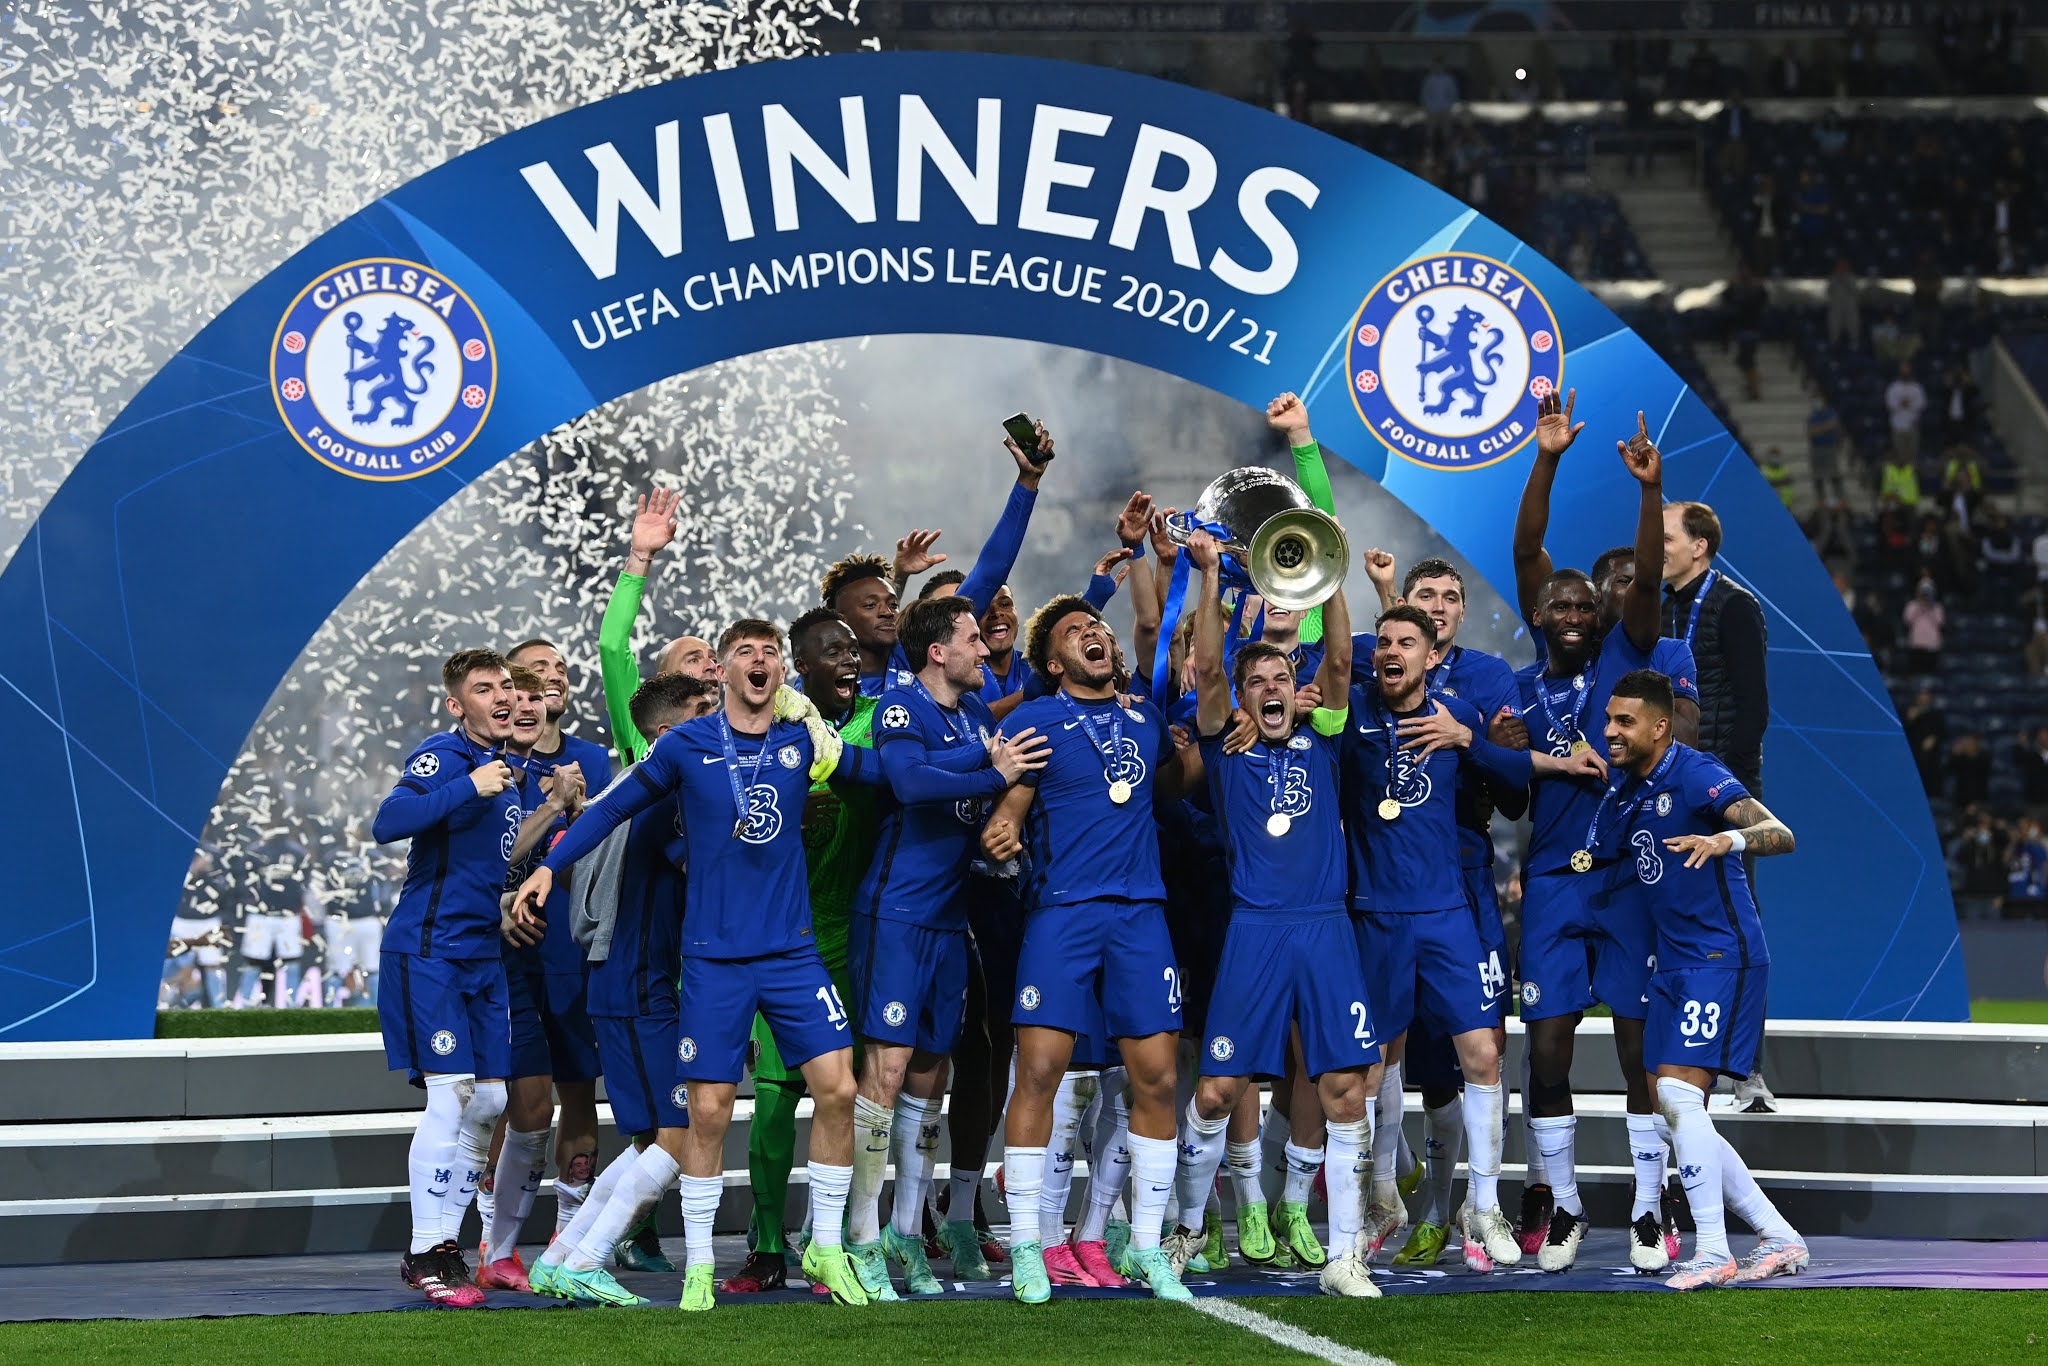 Chelsea ddefeats Manchester City to win Champions League ...